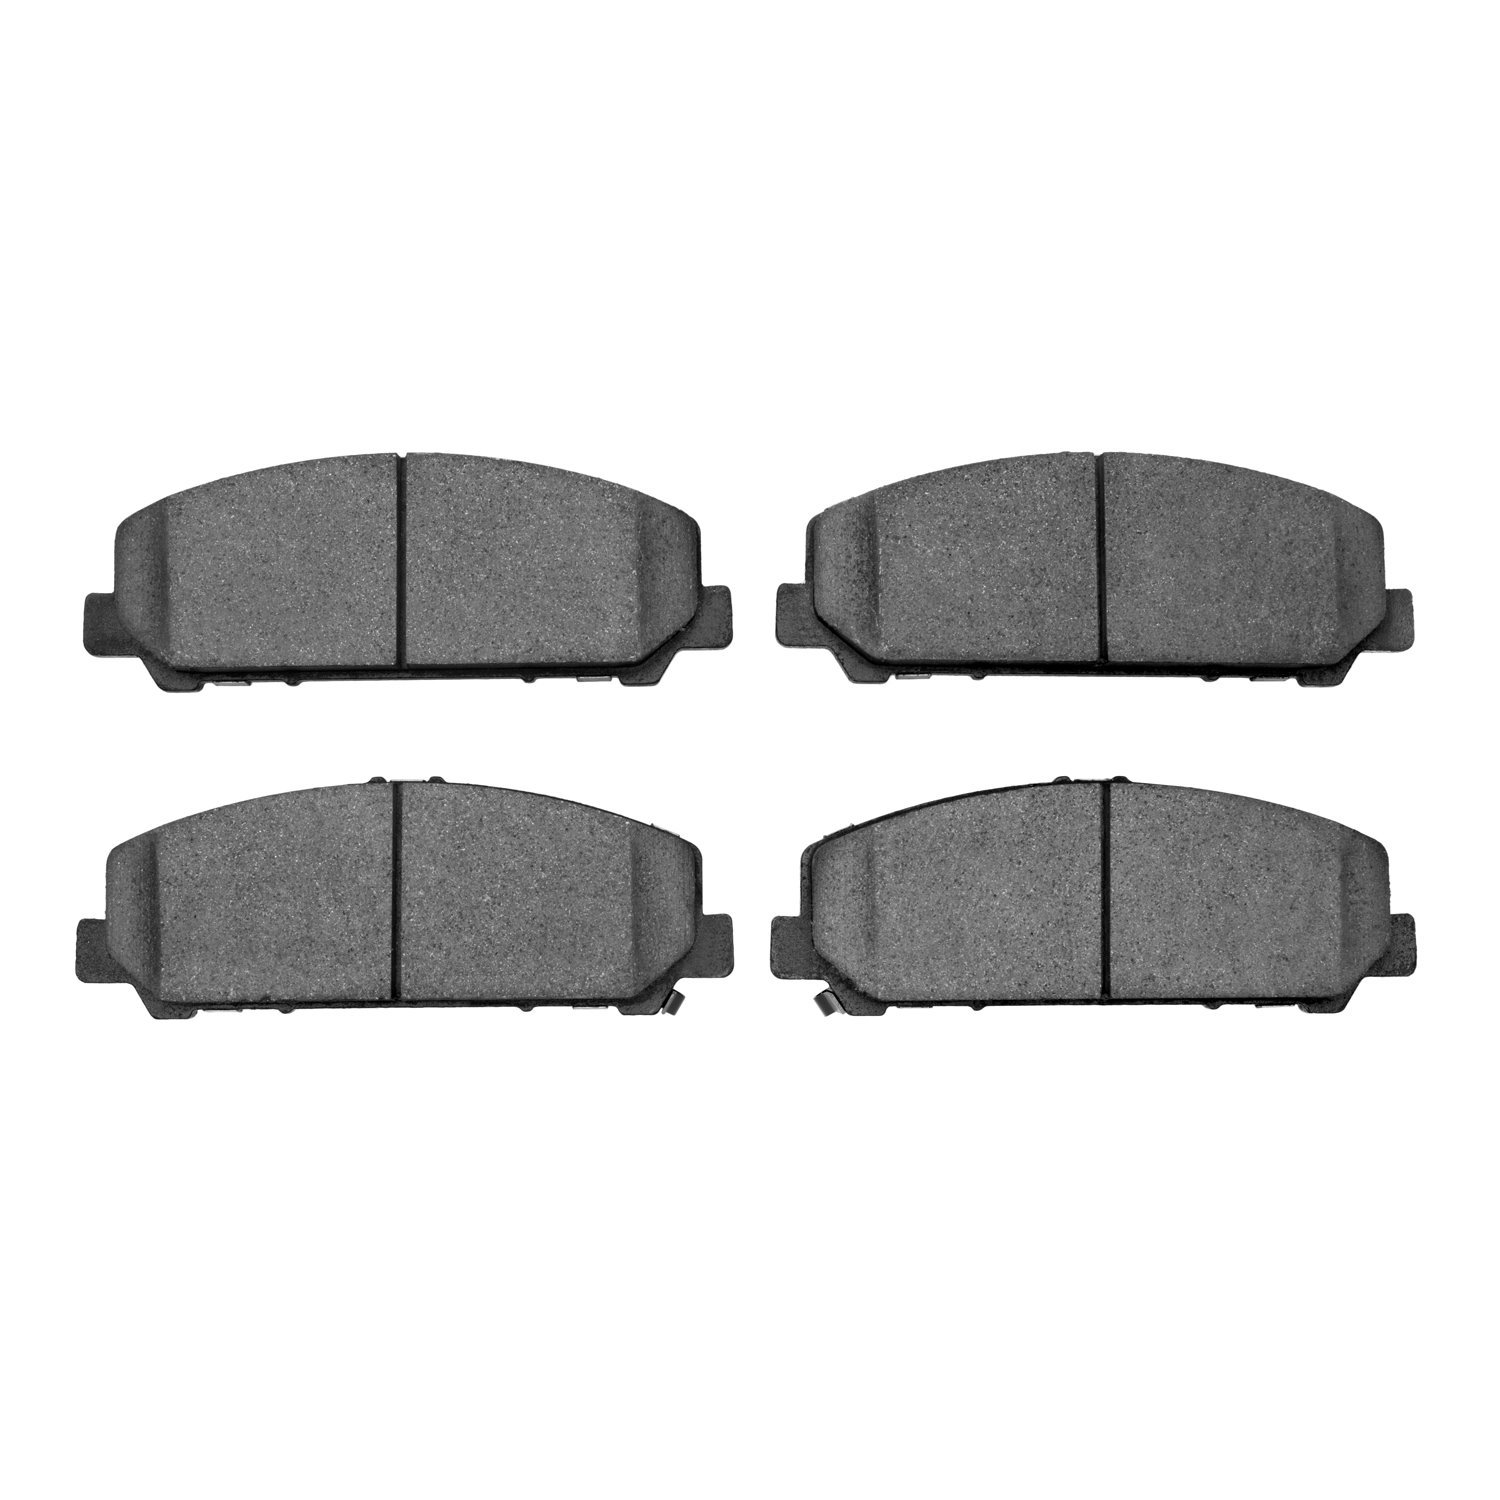 Super-Duty Brake Pads, Fits Select Infiniti/Nissan, Position: Front